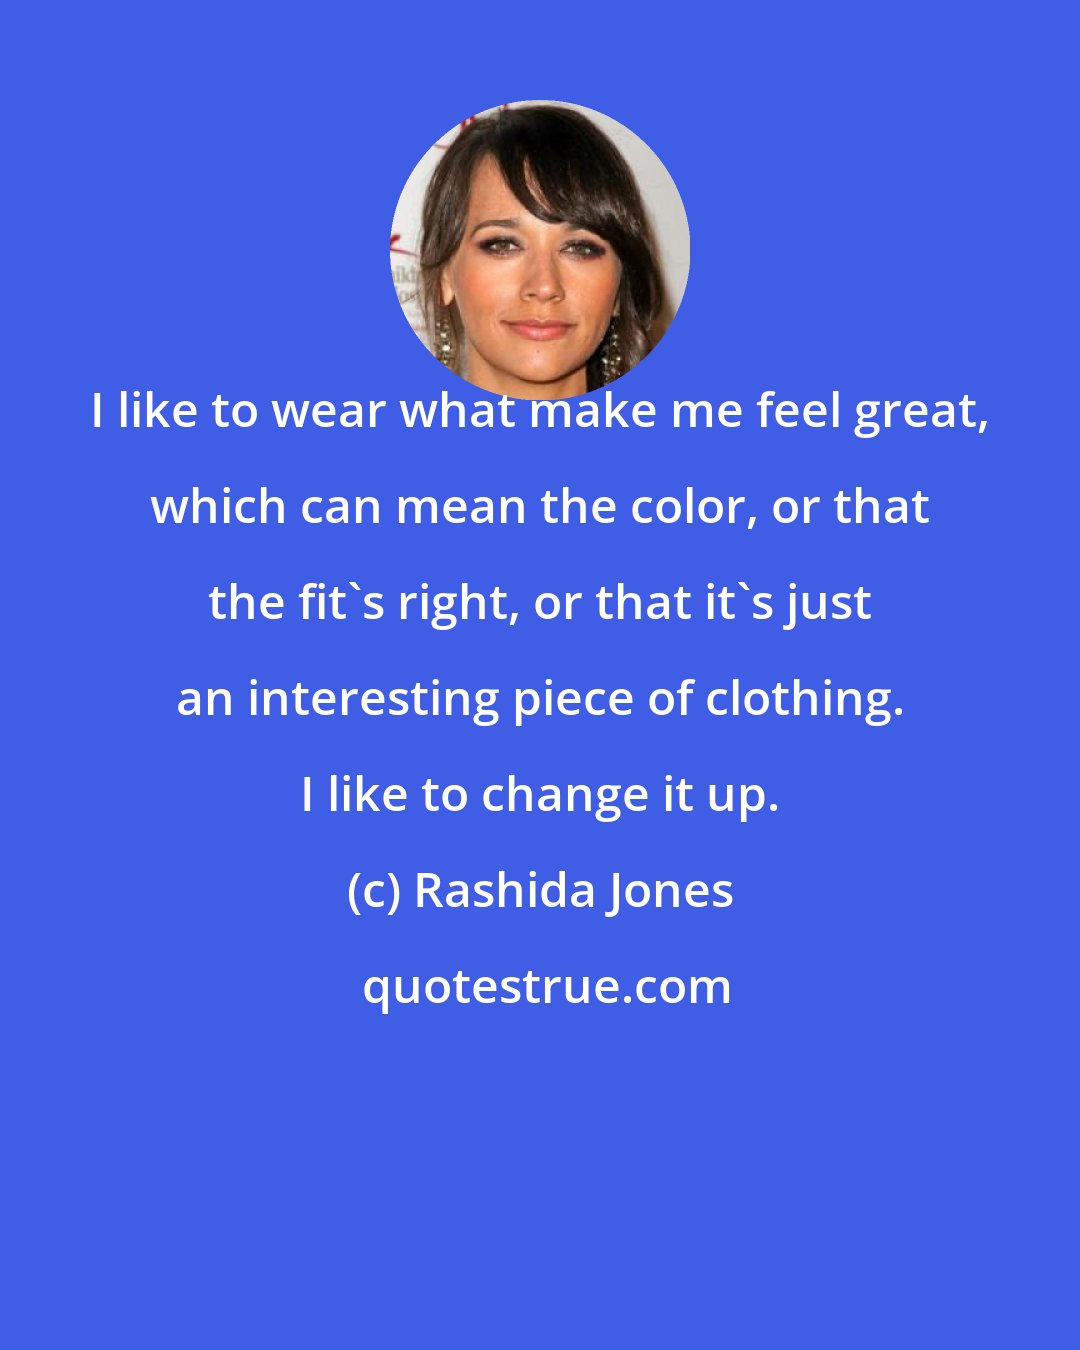 Rashida Jones: I like to wear what make me feel great, which can mean the color, or that the fit's right, or that it's just an interesting piece of clothing. I like to change it up.